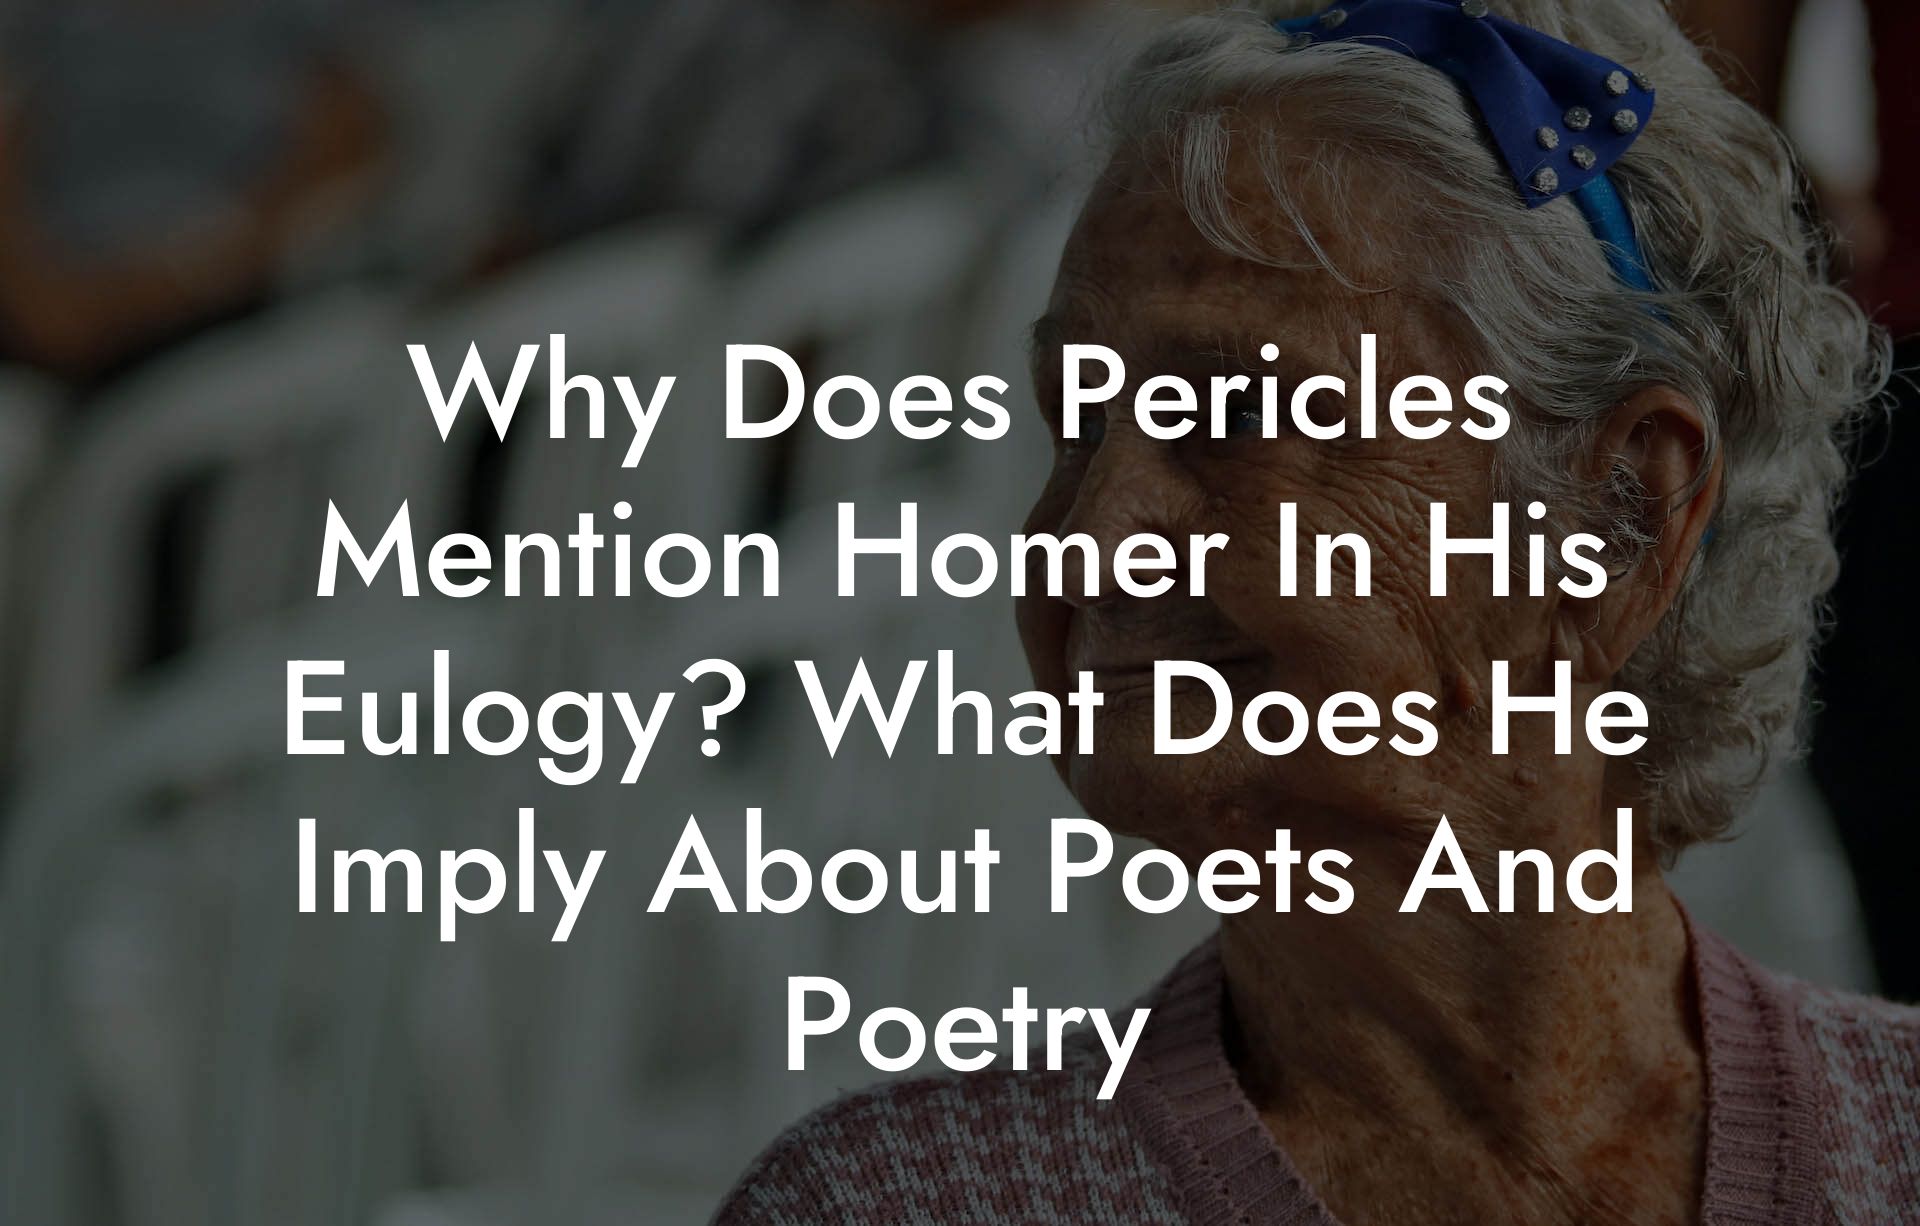 Why Does Pericles Mention Homer In His Eulogy? What Does He Imply About Poets And Poetry